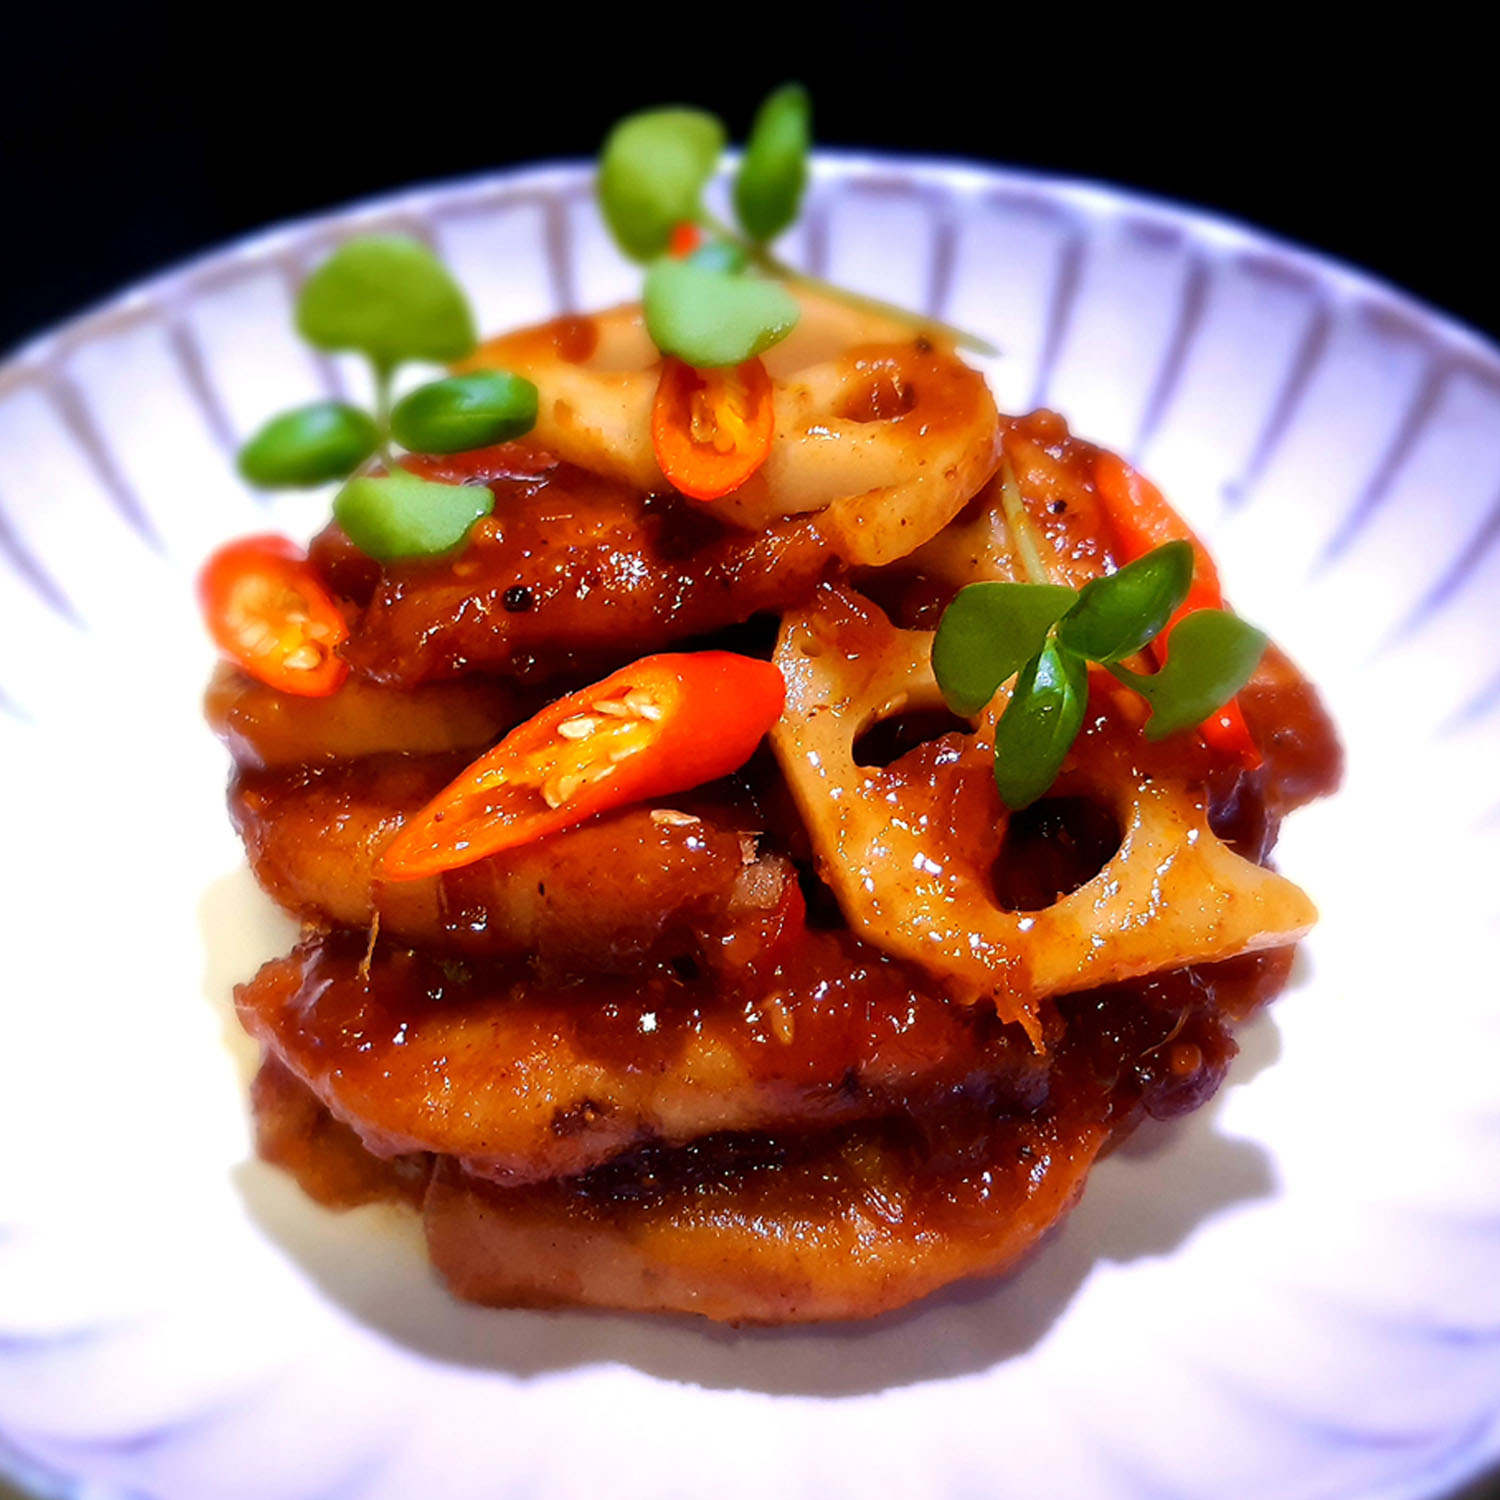 Stir-fried plant based chicken tenders, with black pepper sauce